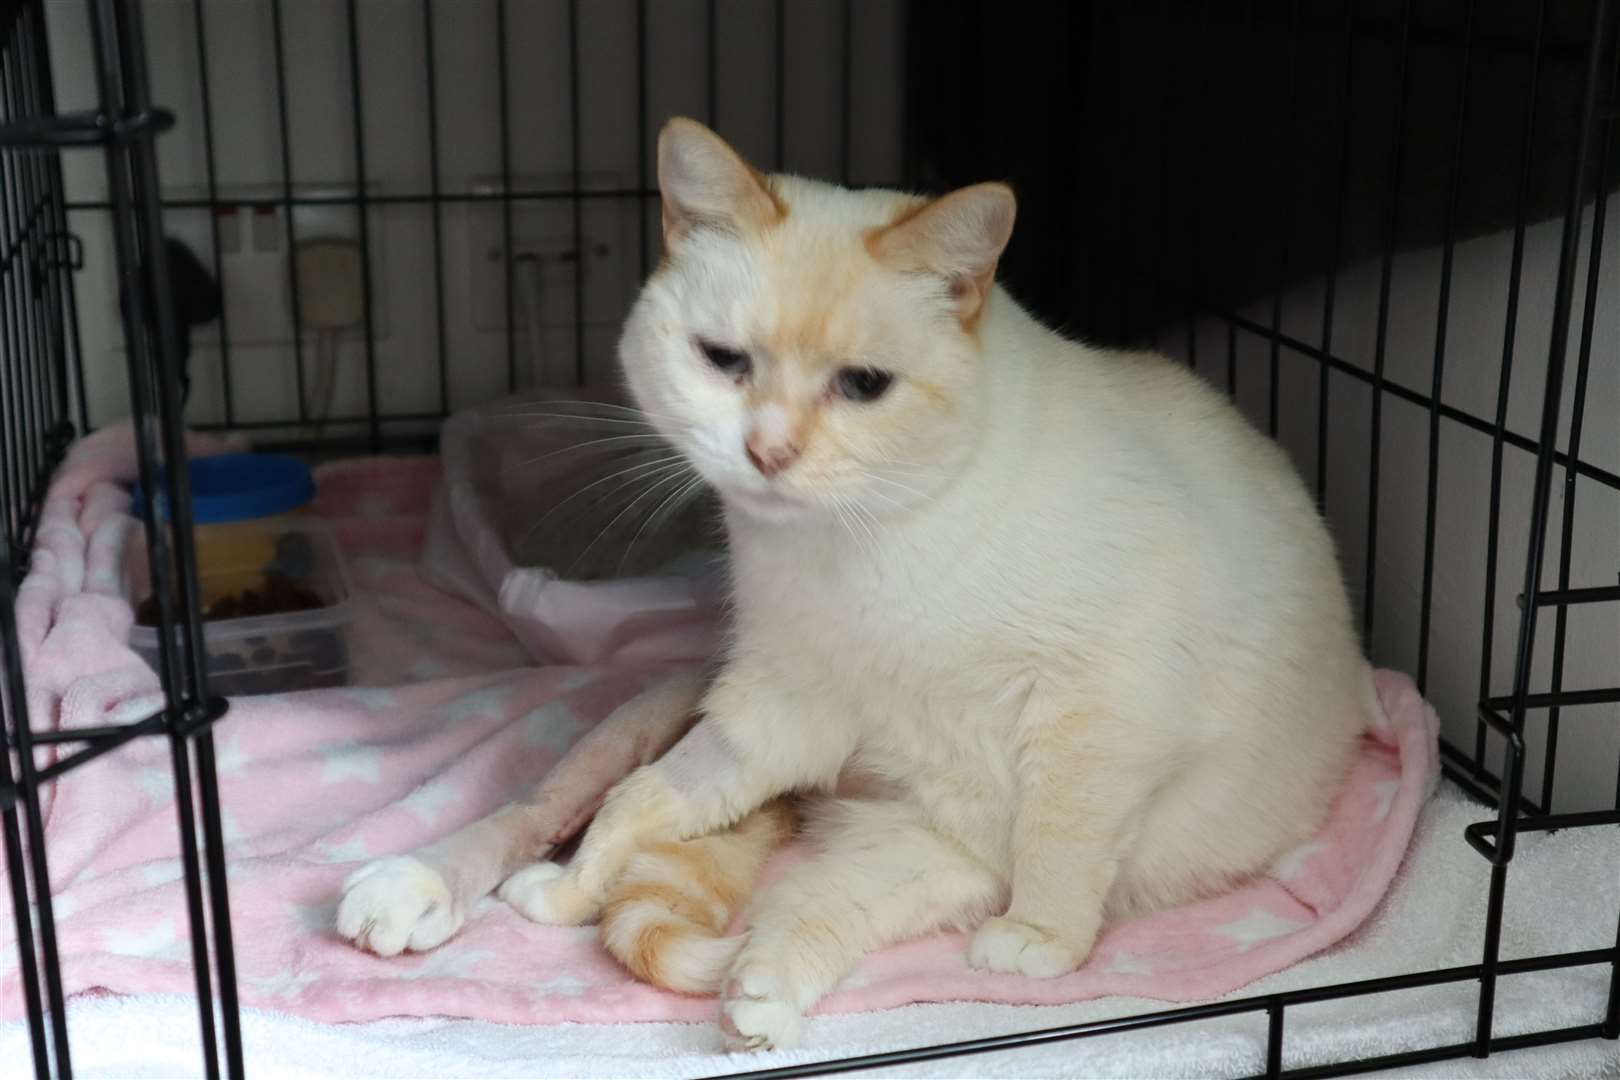 Butterscotch the cat recovering from being run over at Saddlebrook Park